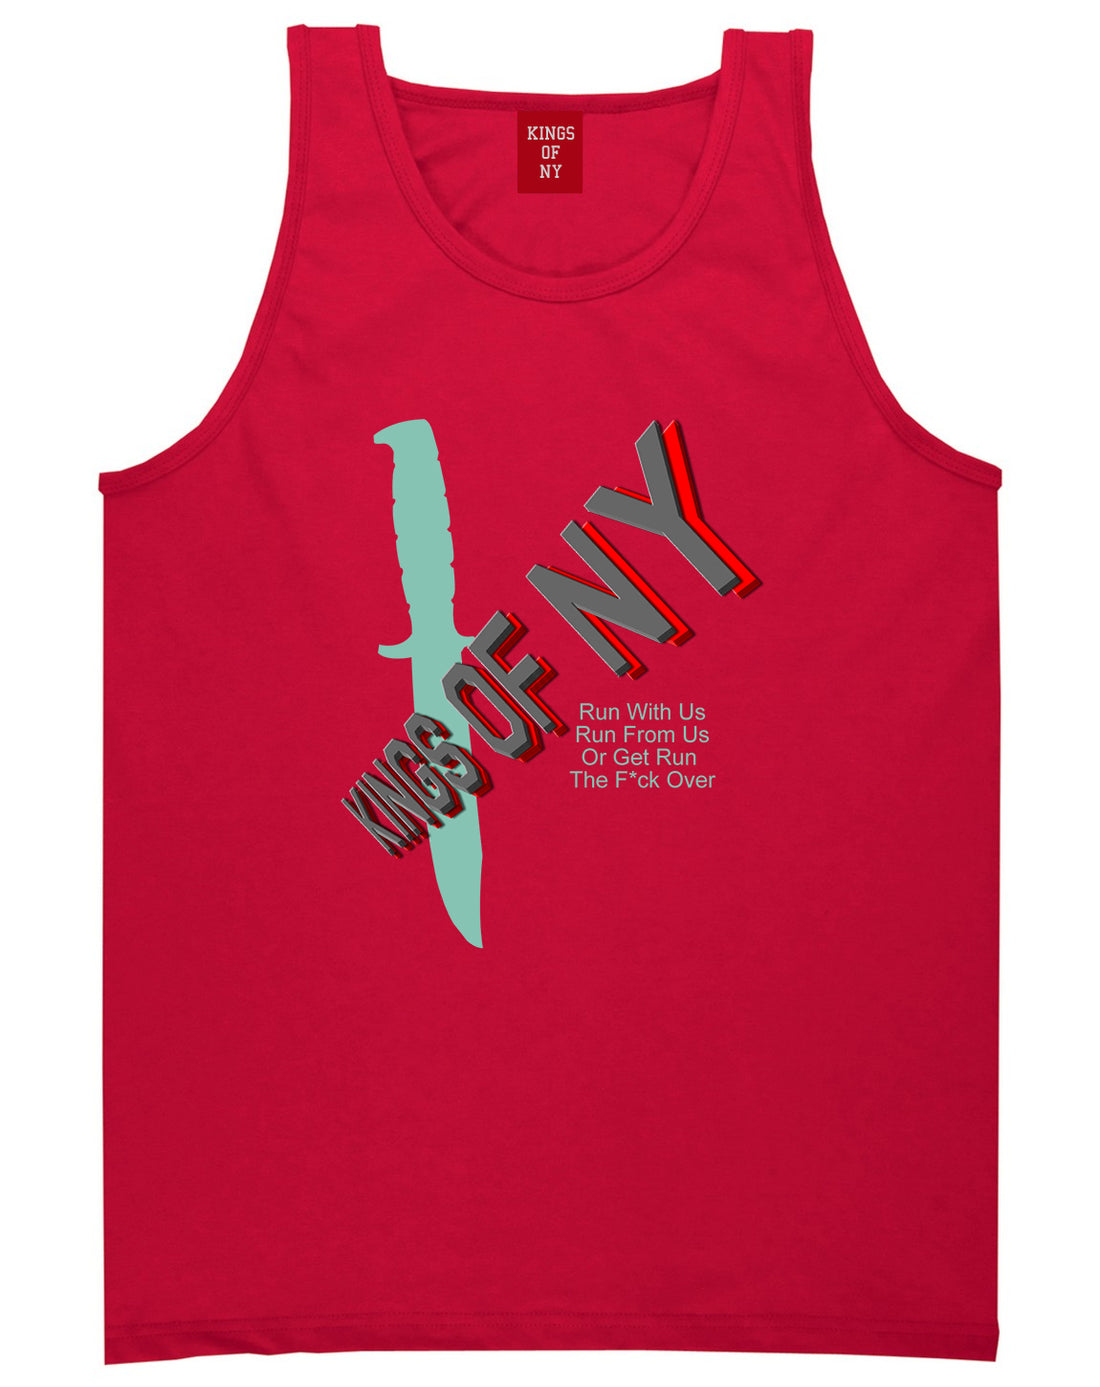 Run With Us Knife Tank Top Shirt in Red